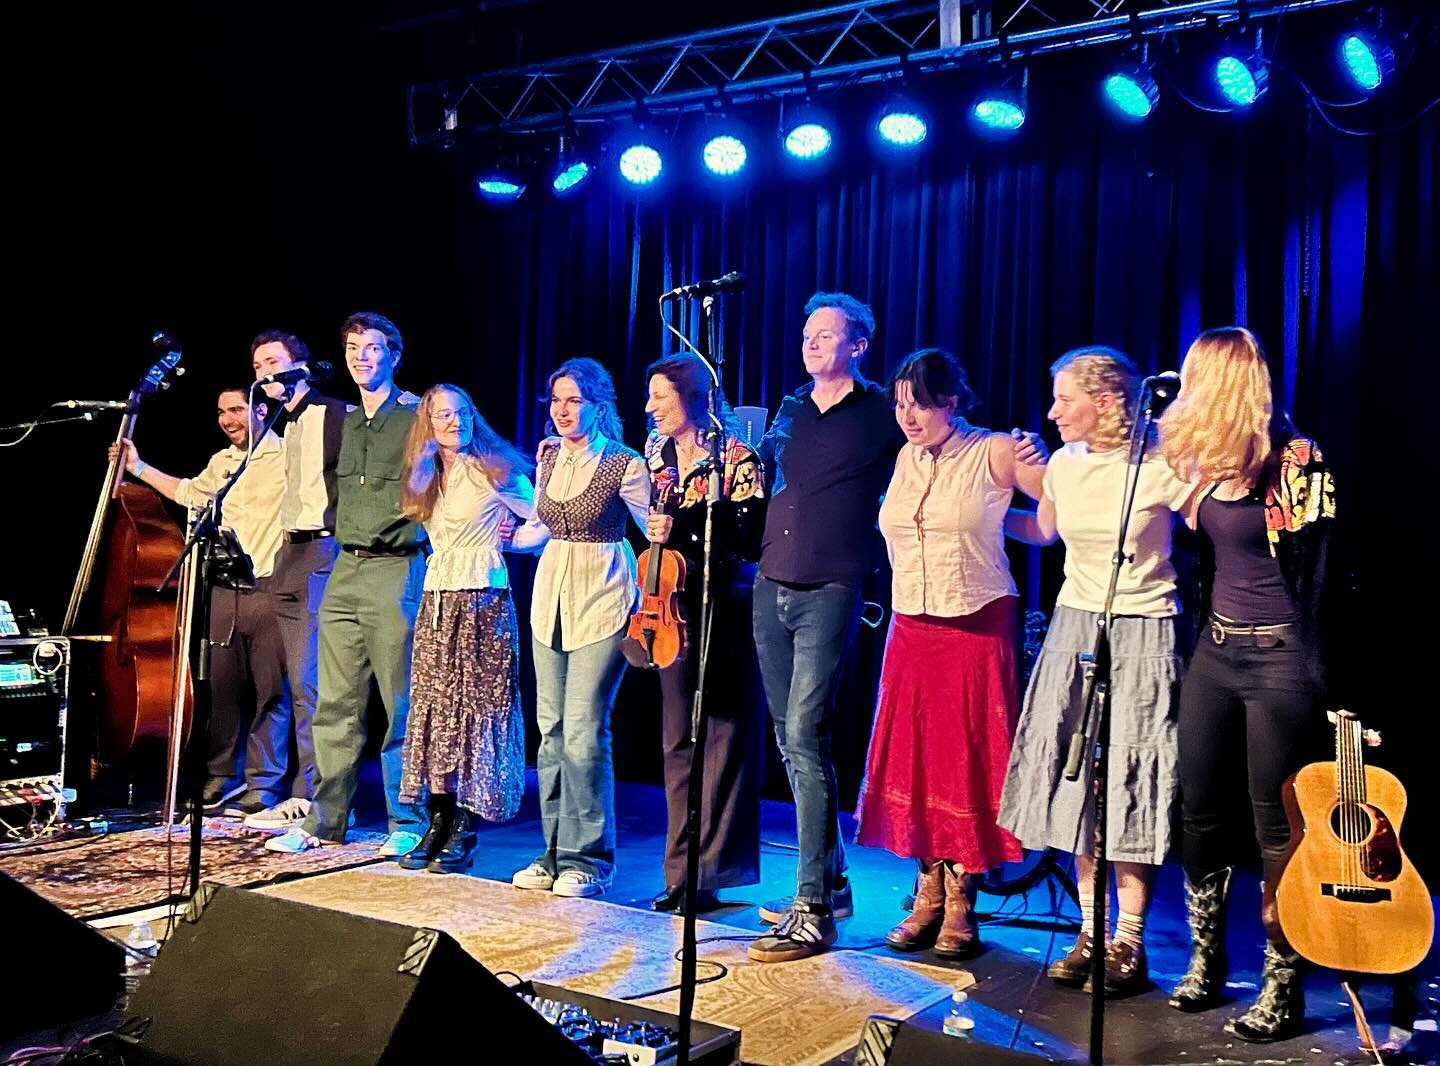 🤩We had an absolute blast tonight at The Cats Cradle with the mighty Carolina Bluegrass Band!🤩 Thanks so much to all who came out, sang and danced and rocked the house with us all! We can&rsquo;t wait to see you again soon! 📸: Tami Atkins